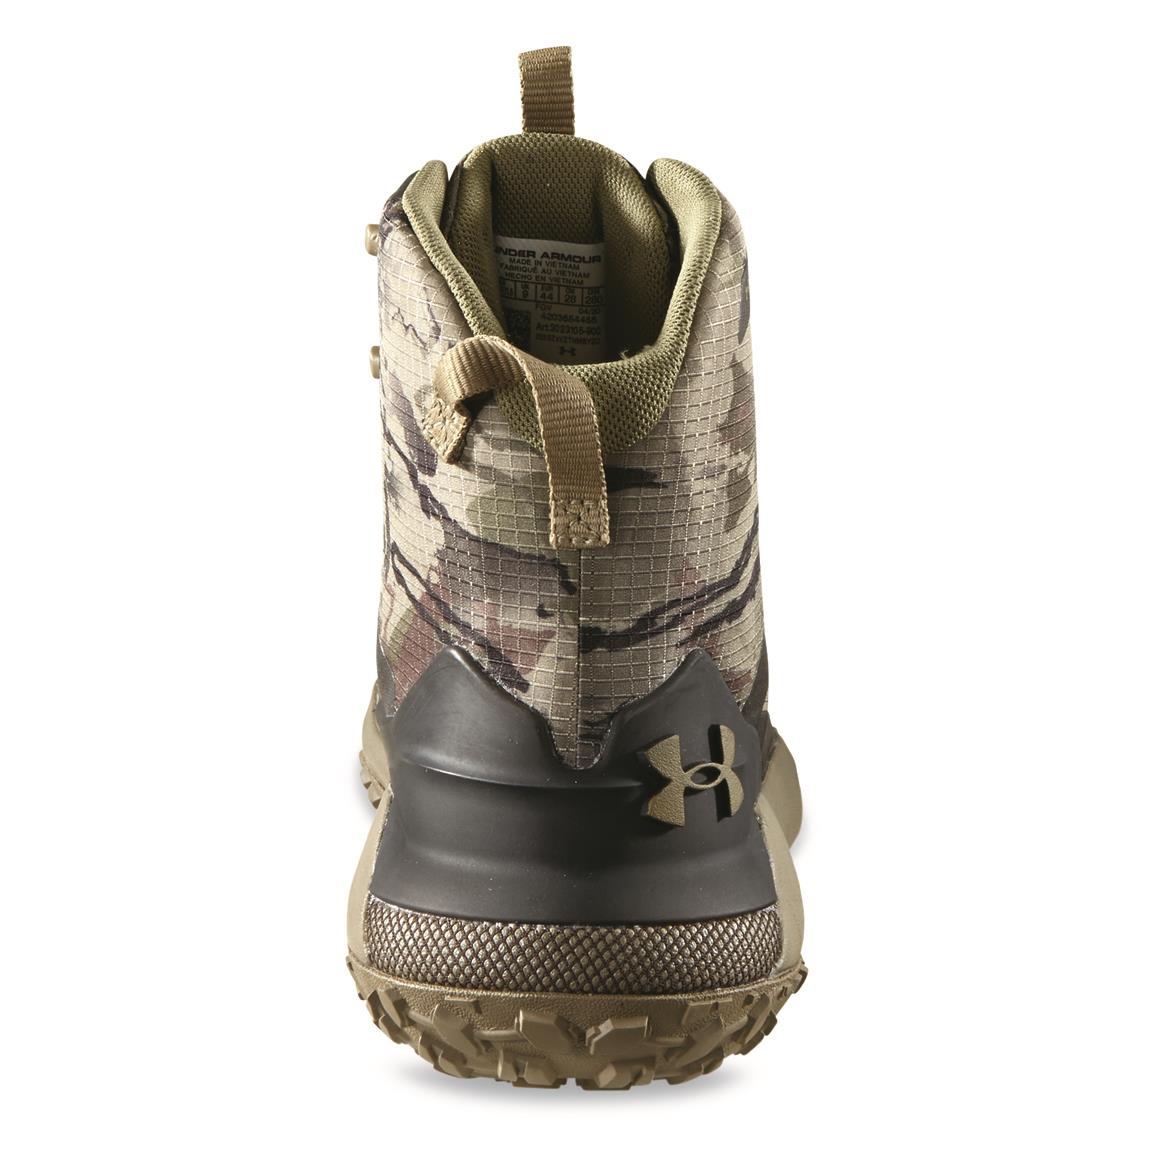 Under Armour Insulated Hunting Boots | Sportsman's Guide